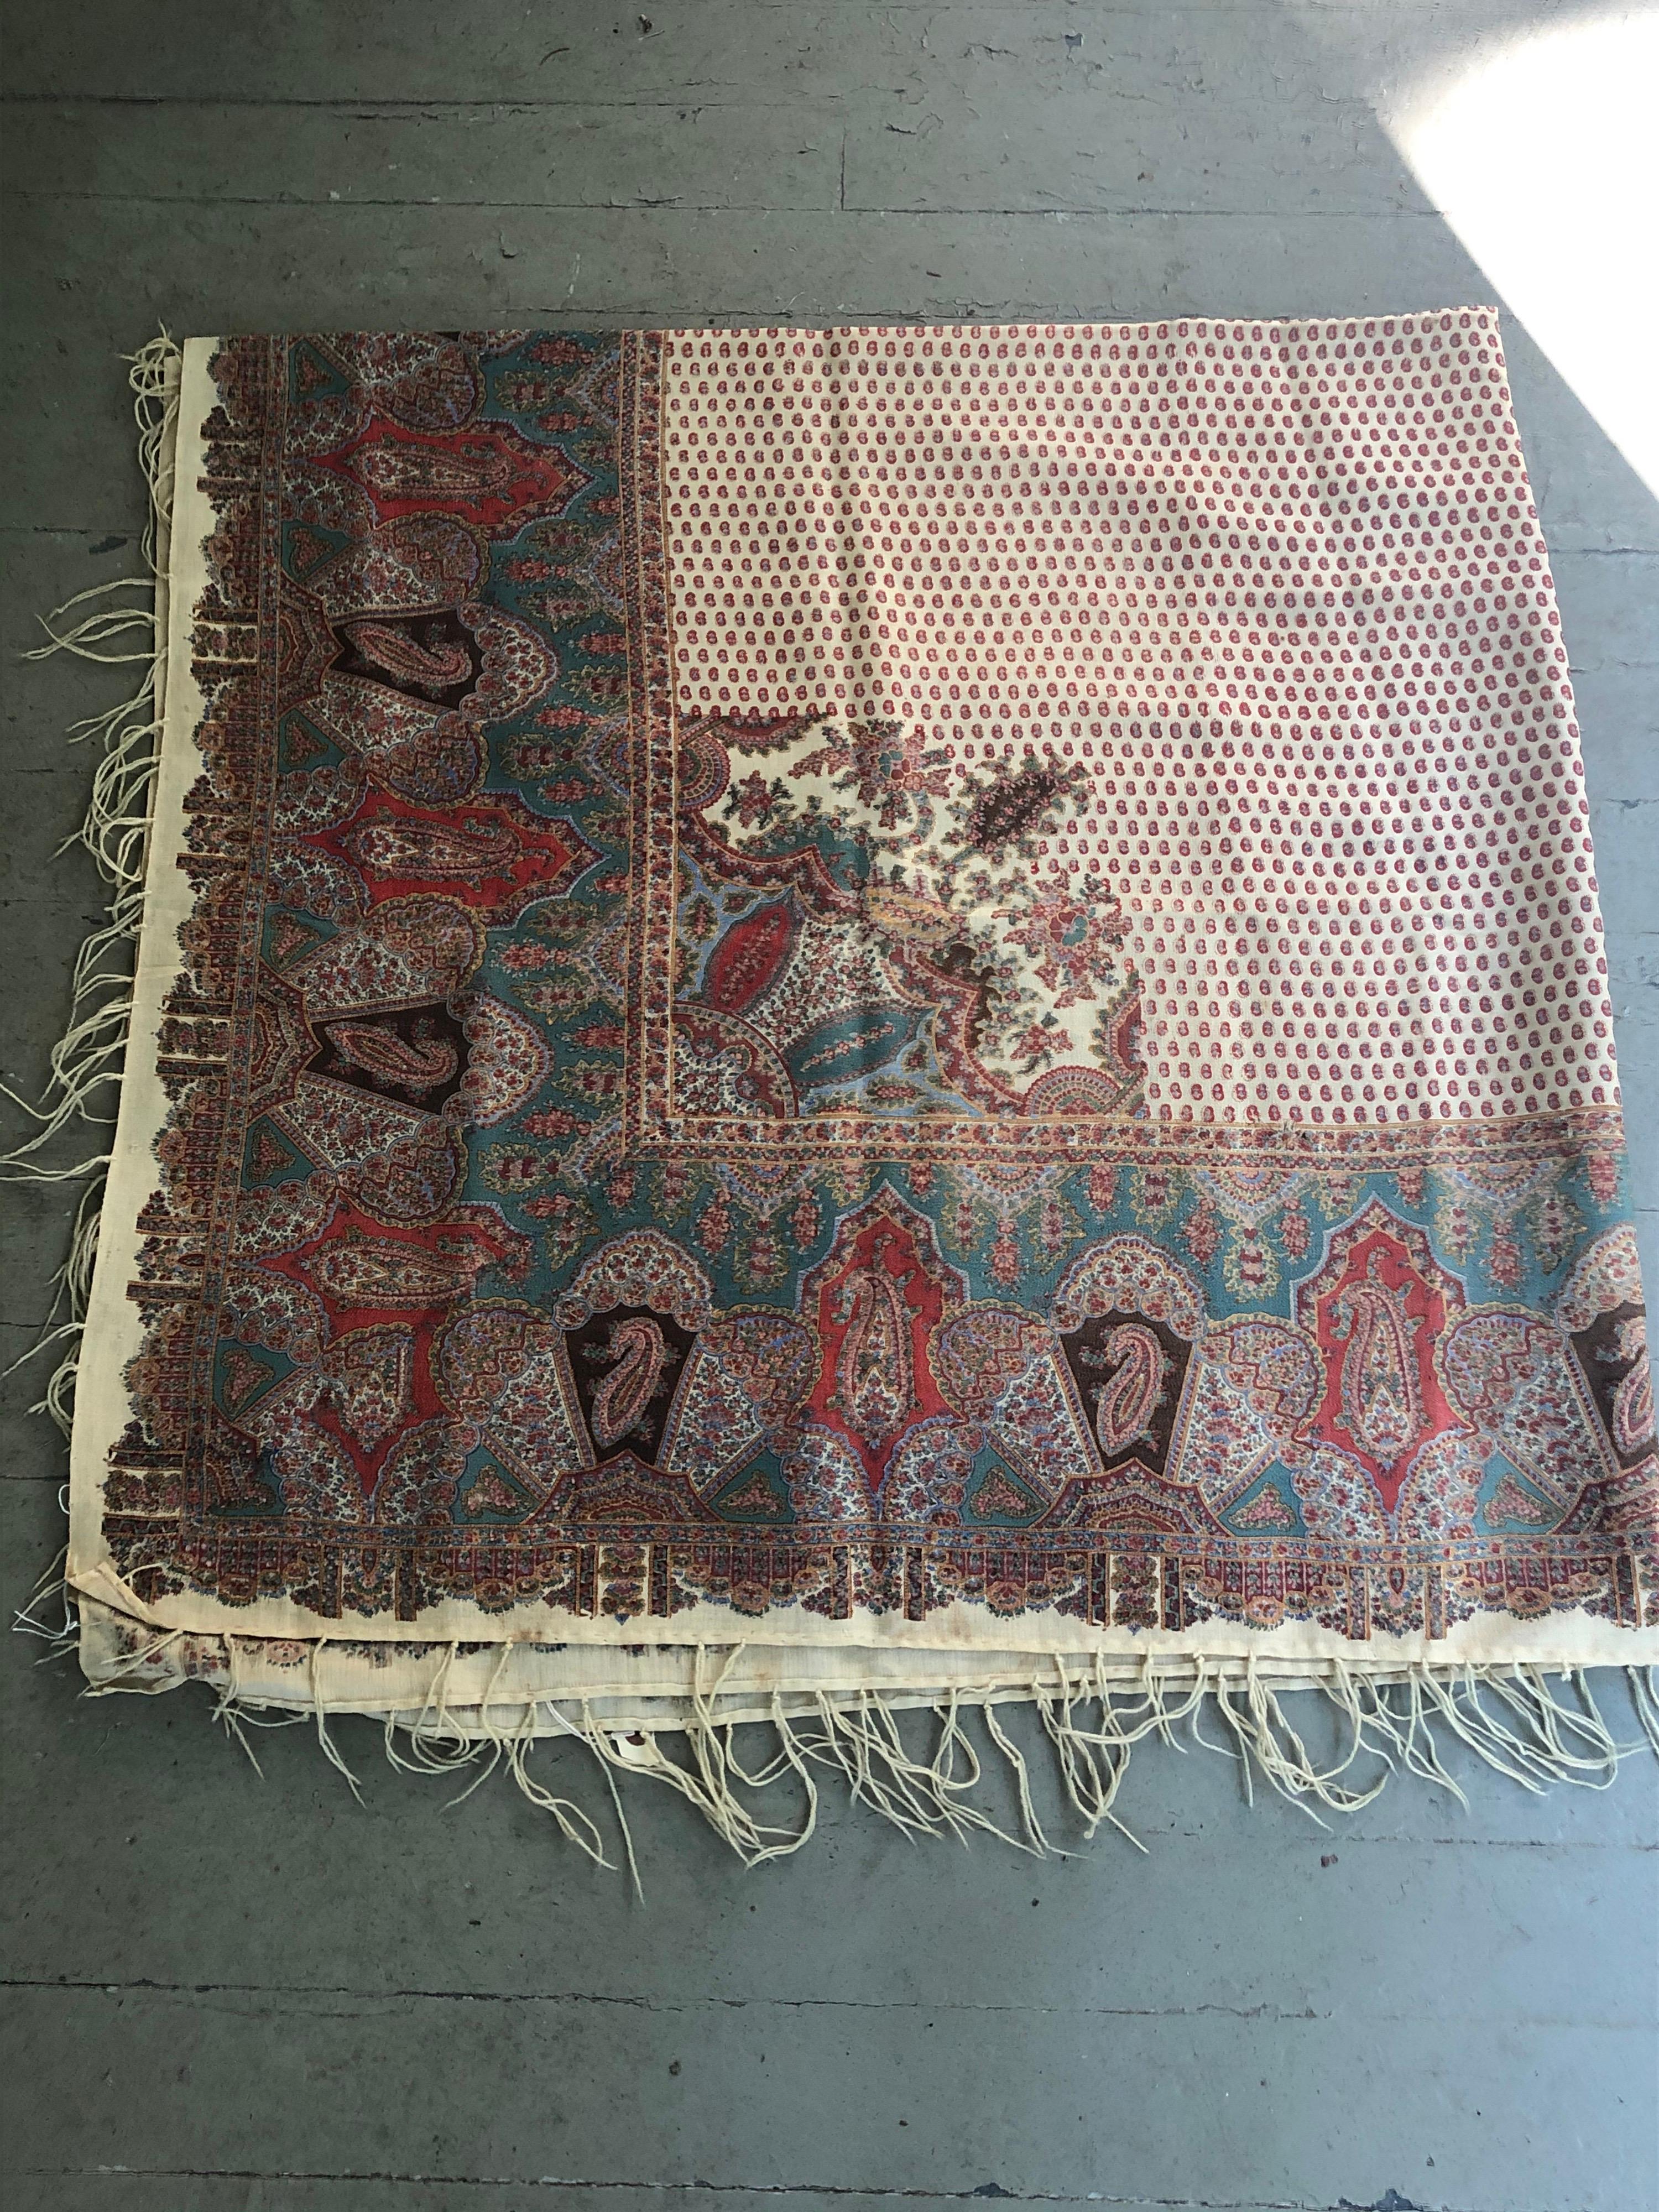 Very finely woven wool printed paisley throw. Probably French. A few small stains
and some wear spots, but in overall very good condition. Nicely twisted fringe.